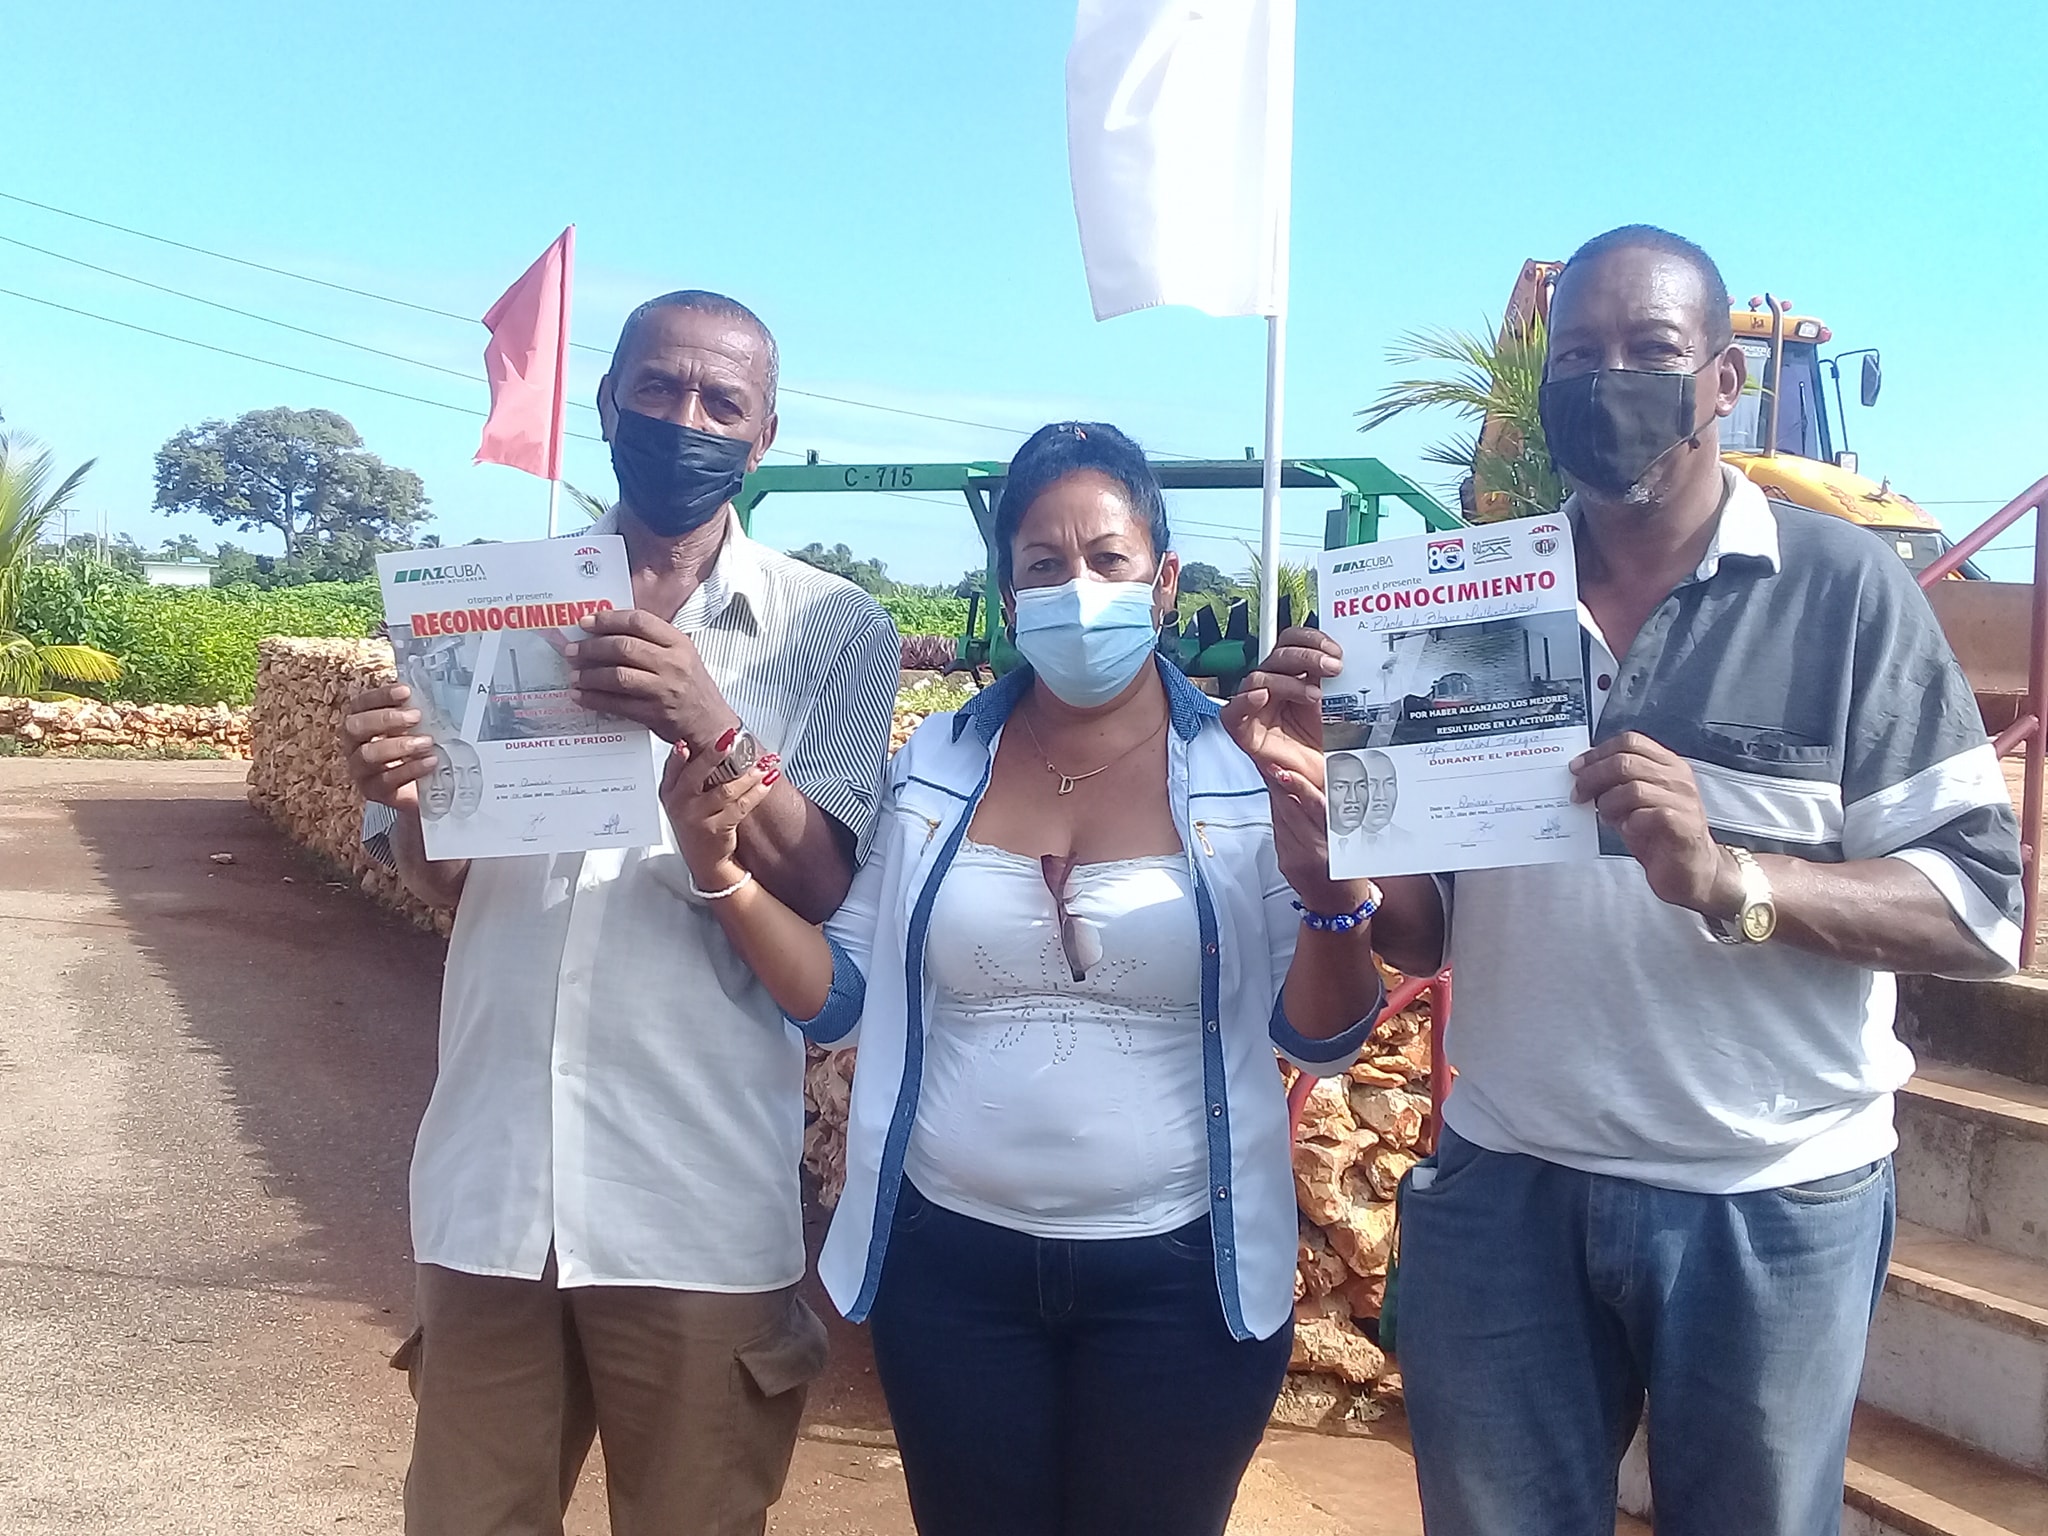 Mayabeque workers with relevant experience in the sugar sector are distinguished.